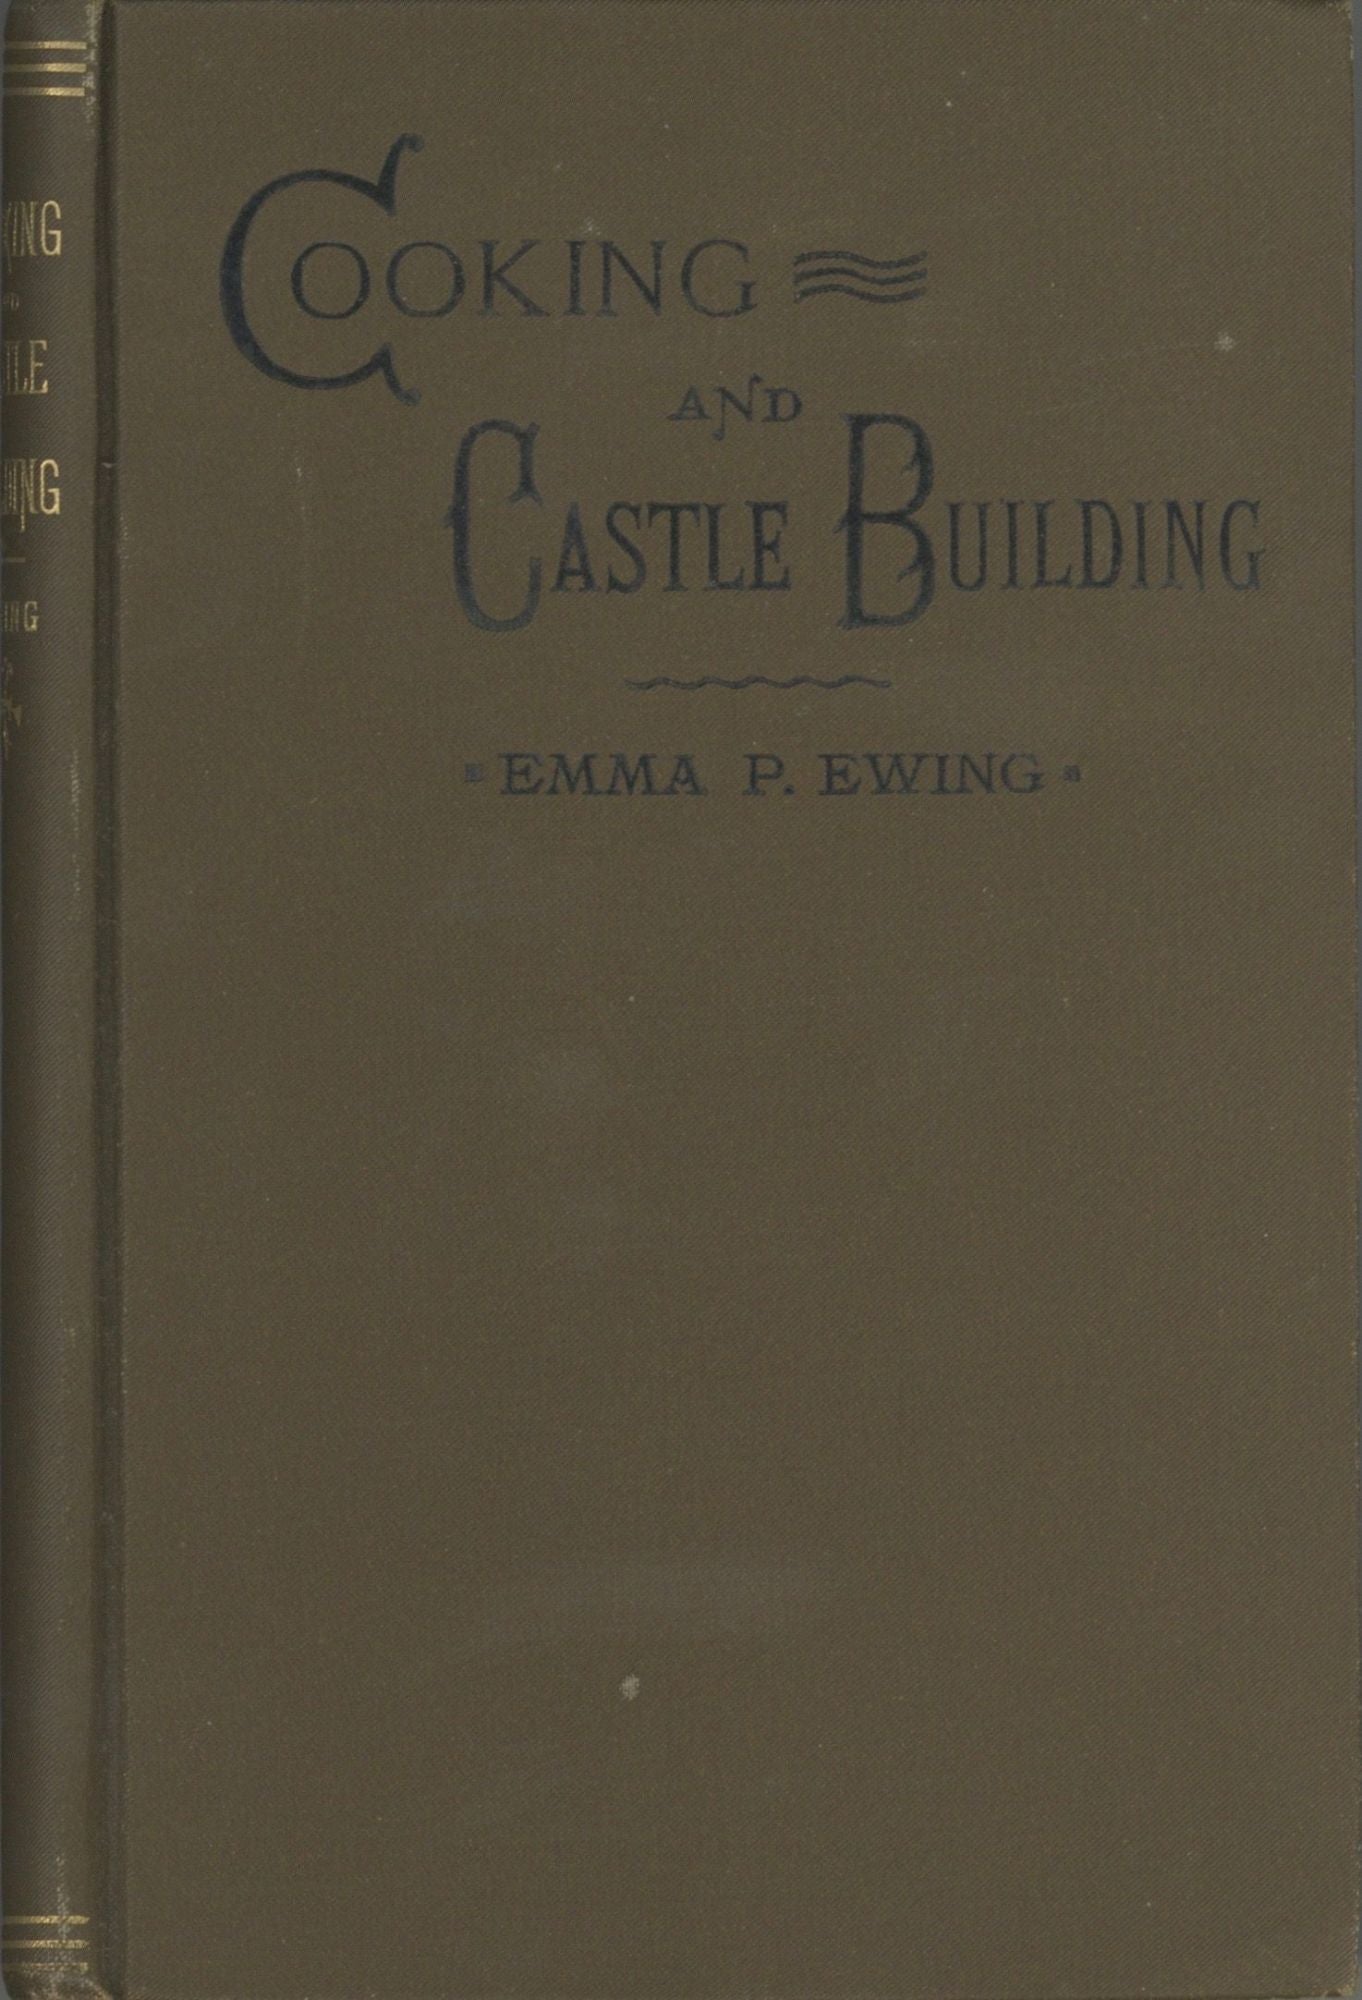 Item #4957 Cooking and Castle Building. Emma P. Ewing.